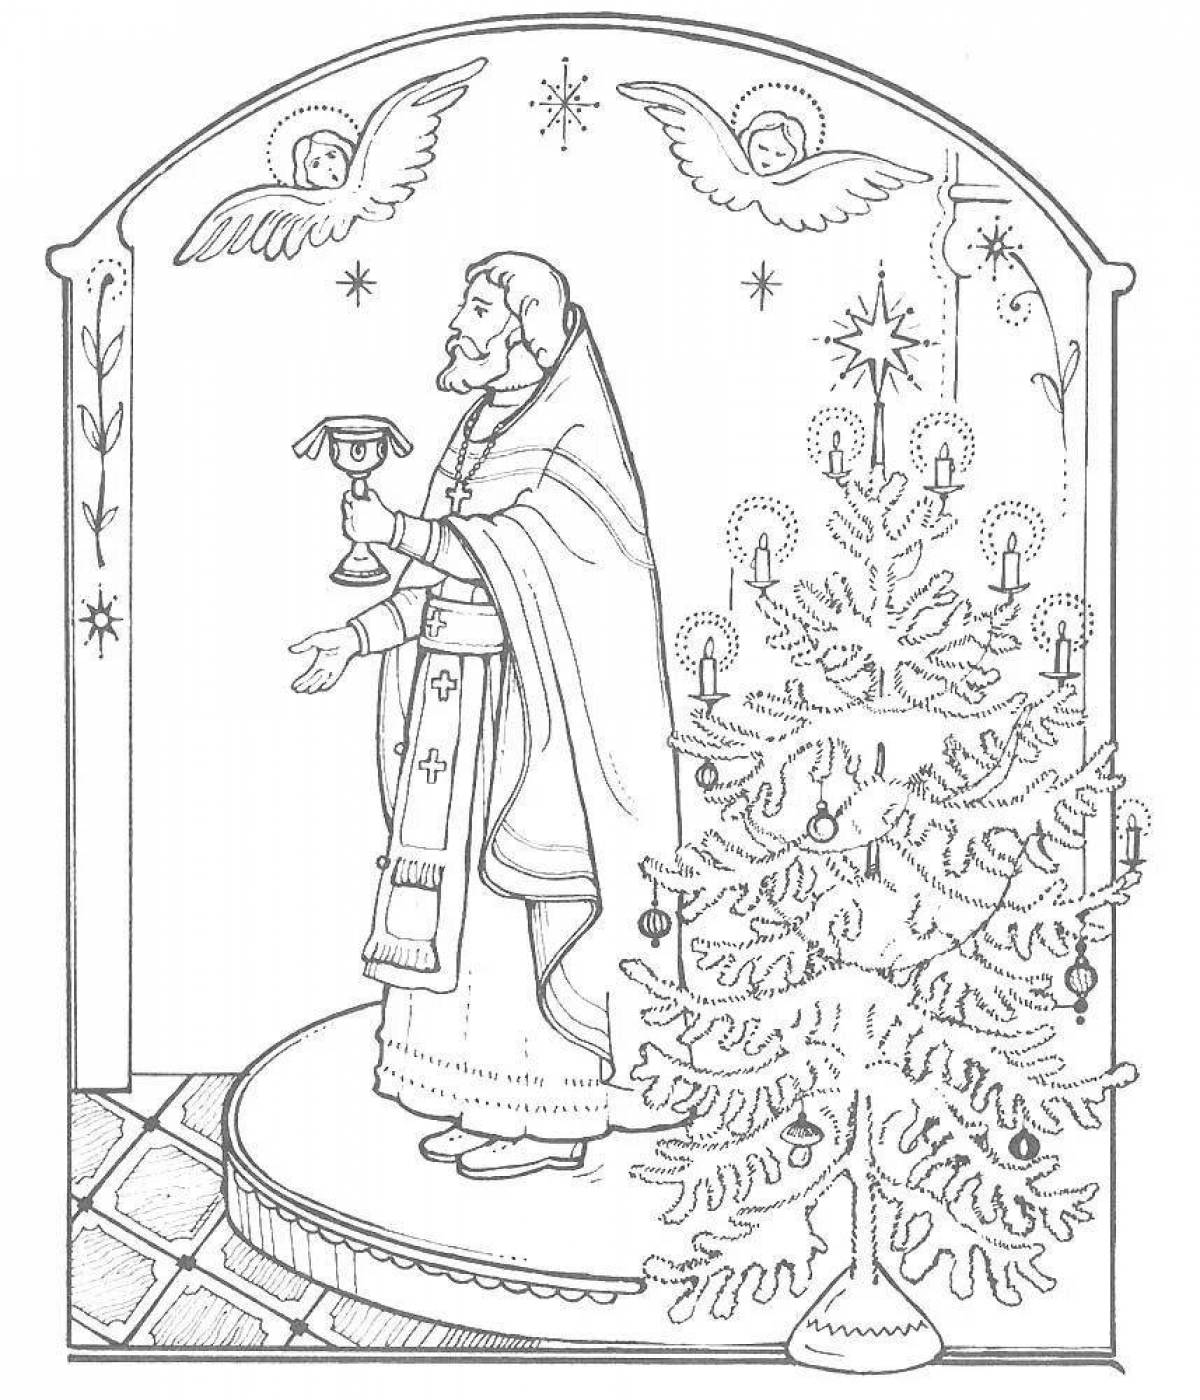 Exalted baptism coloring page